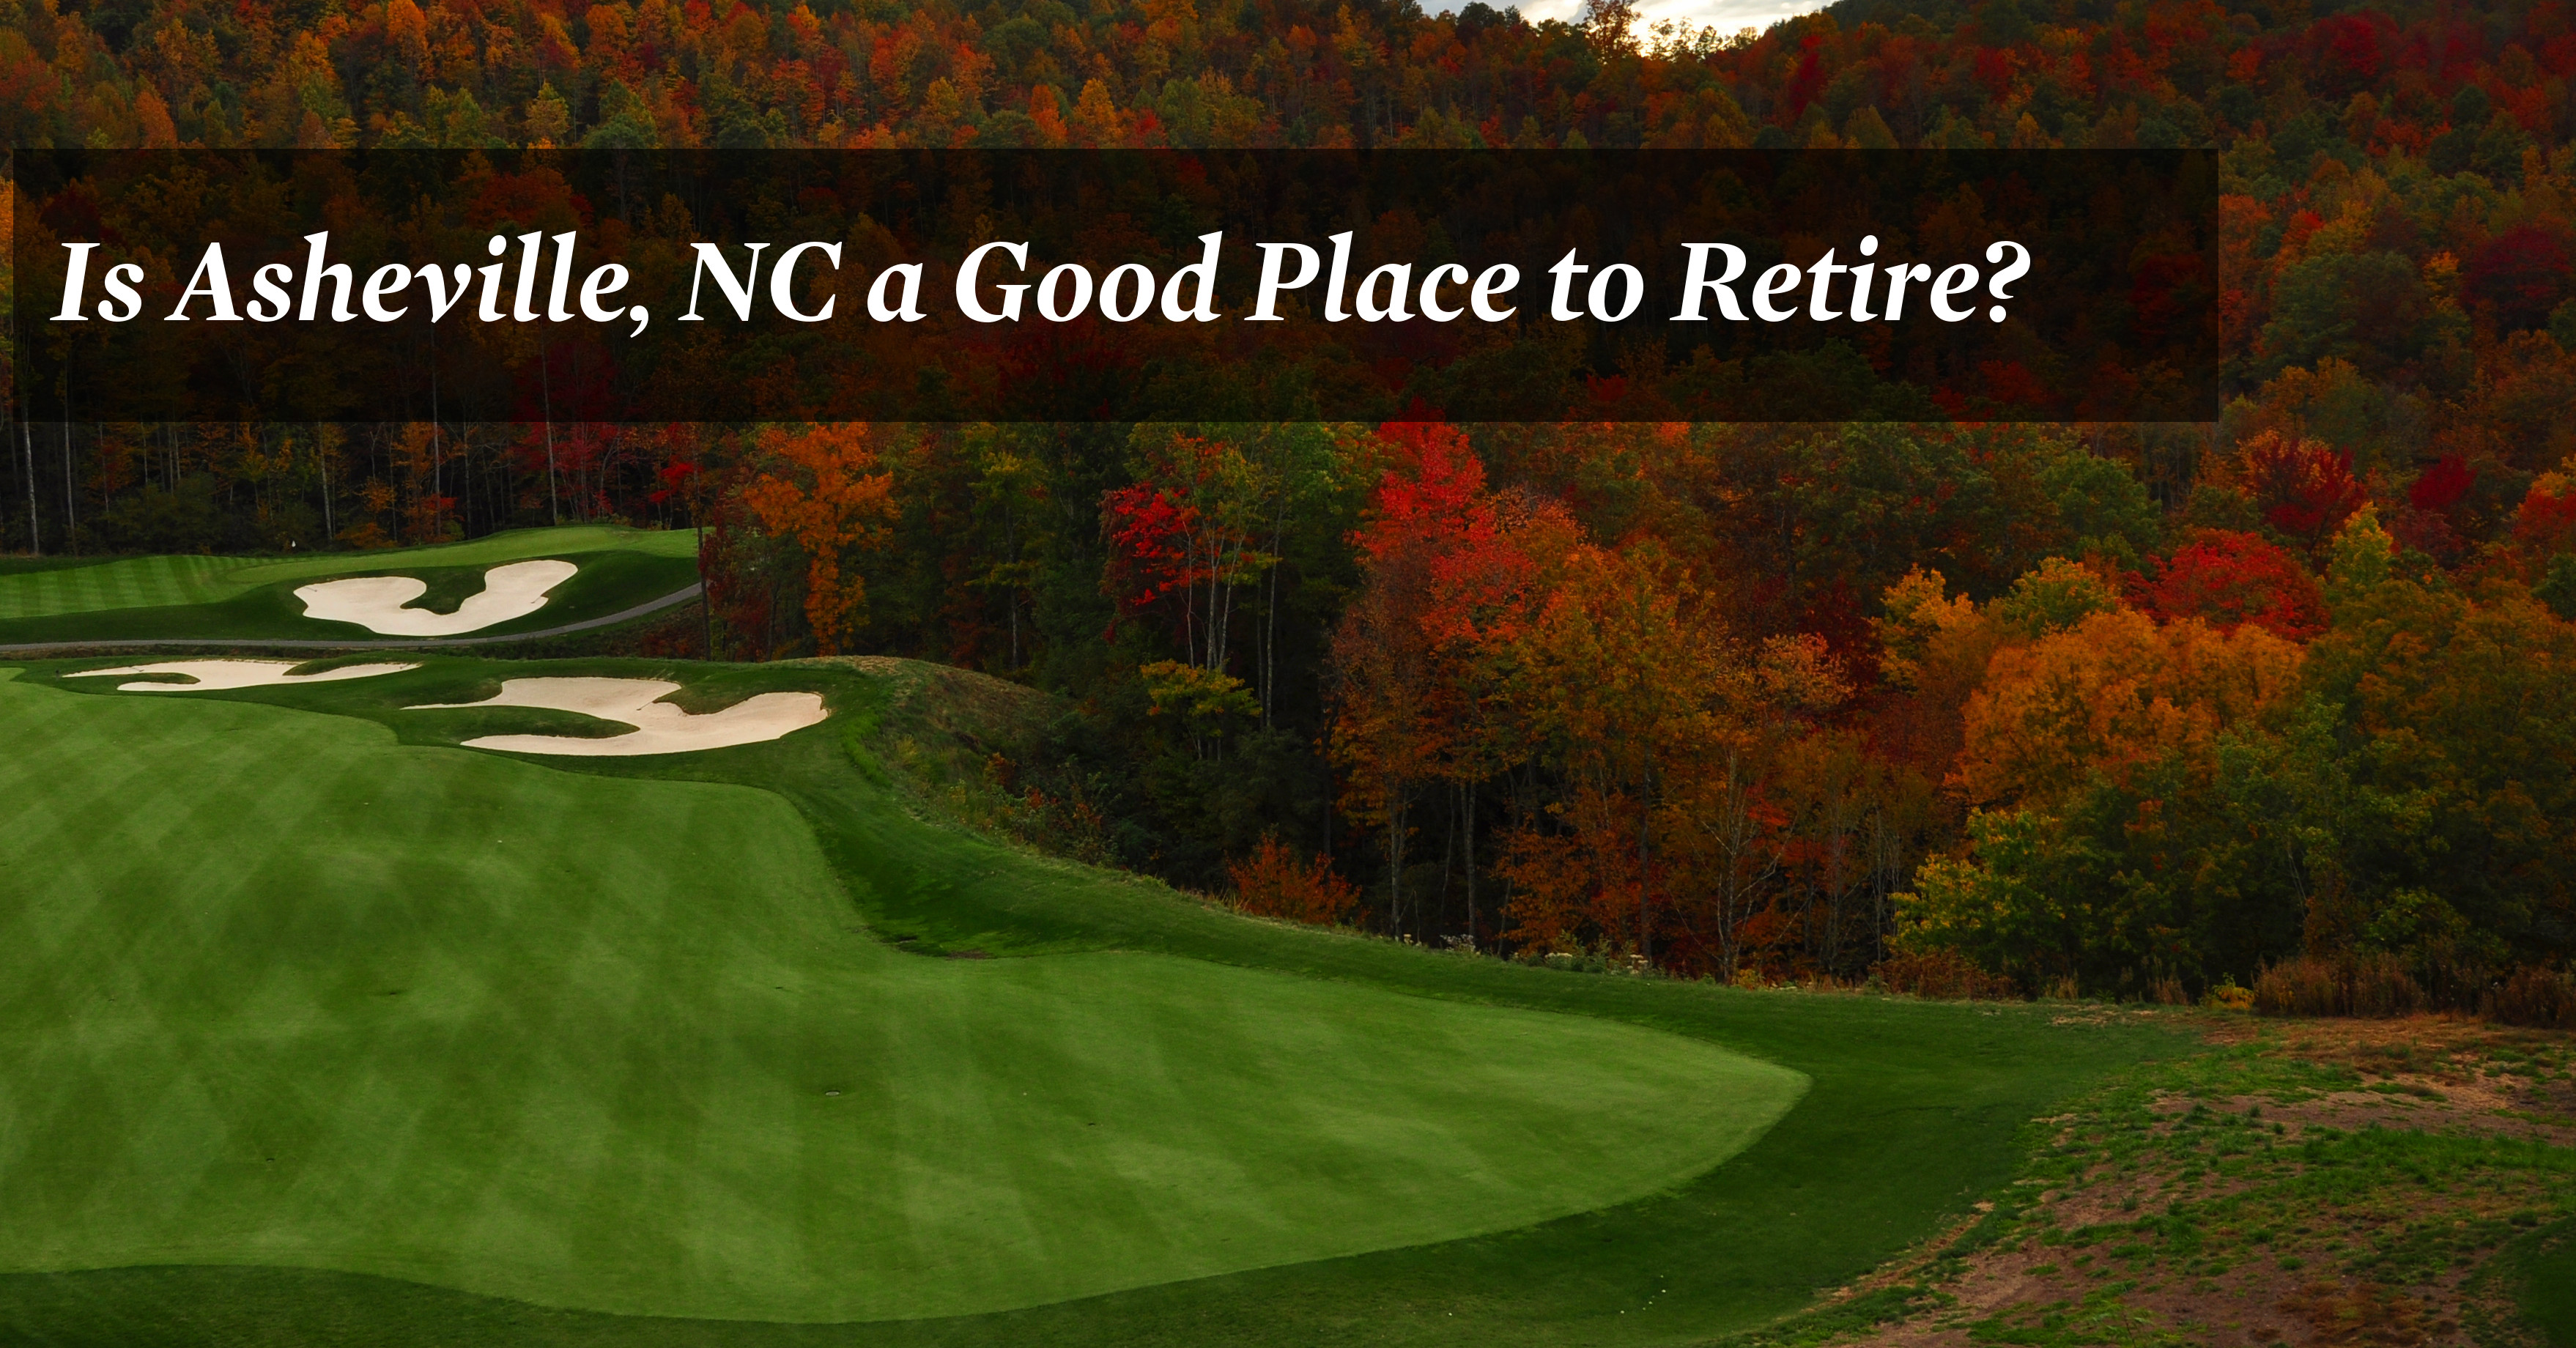 Retiring in Asheville, NC: Reasons, Best Places & More!